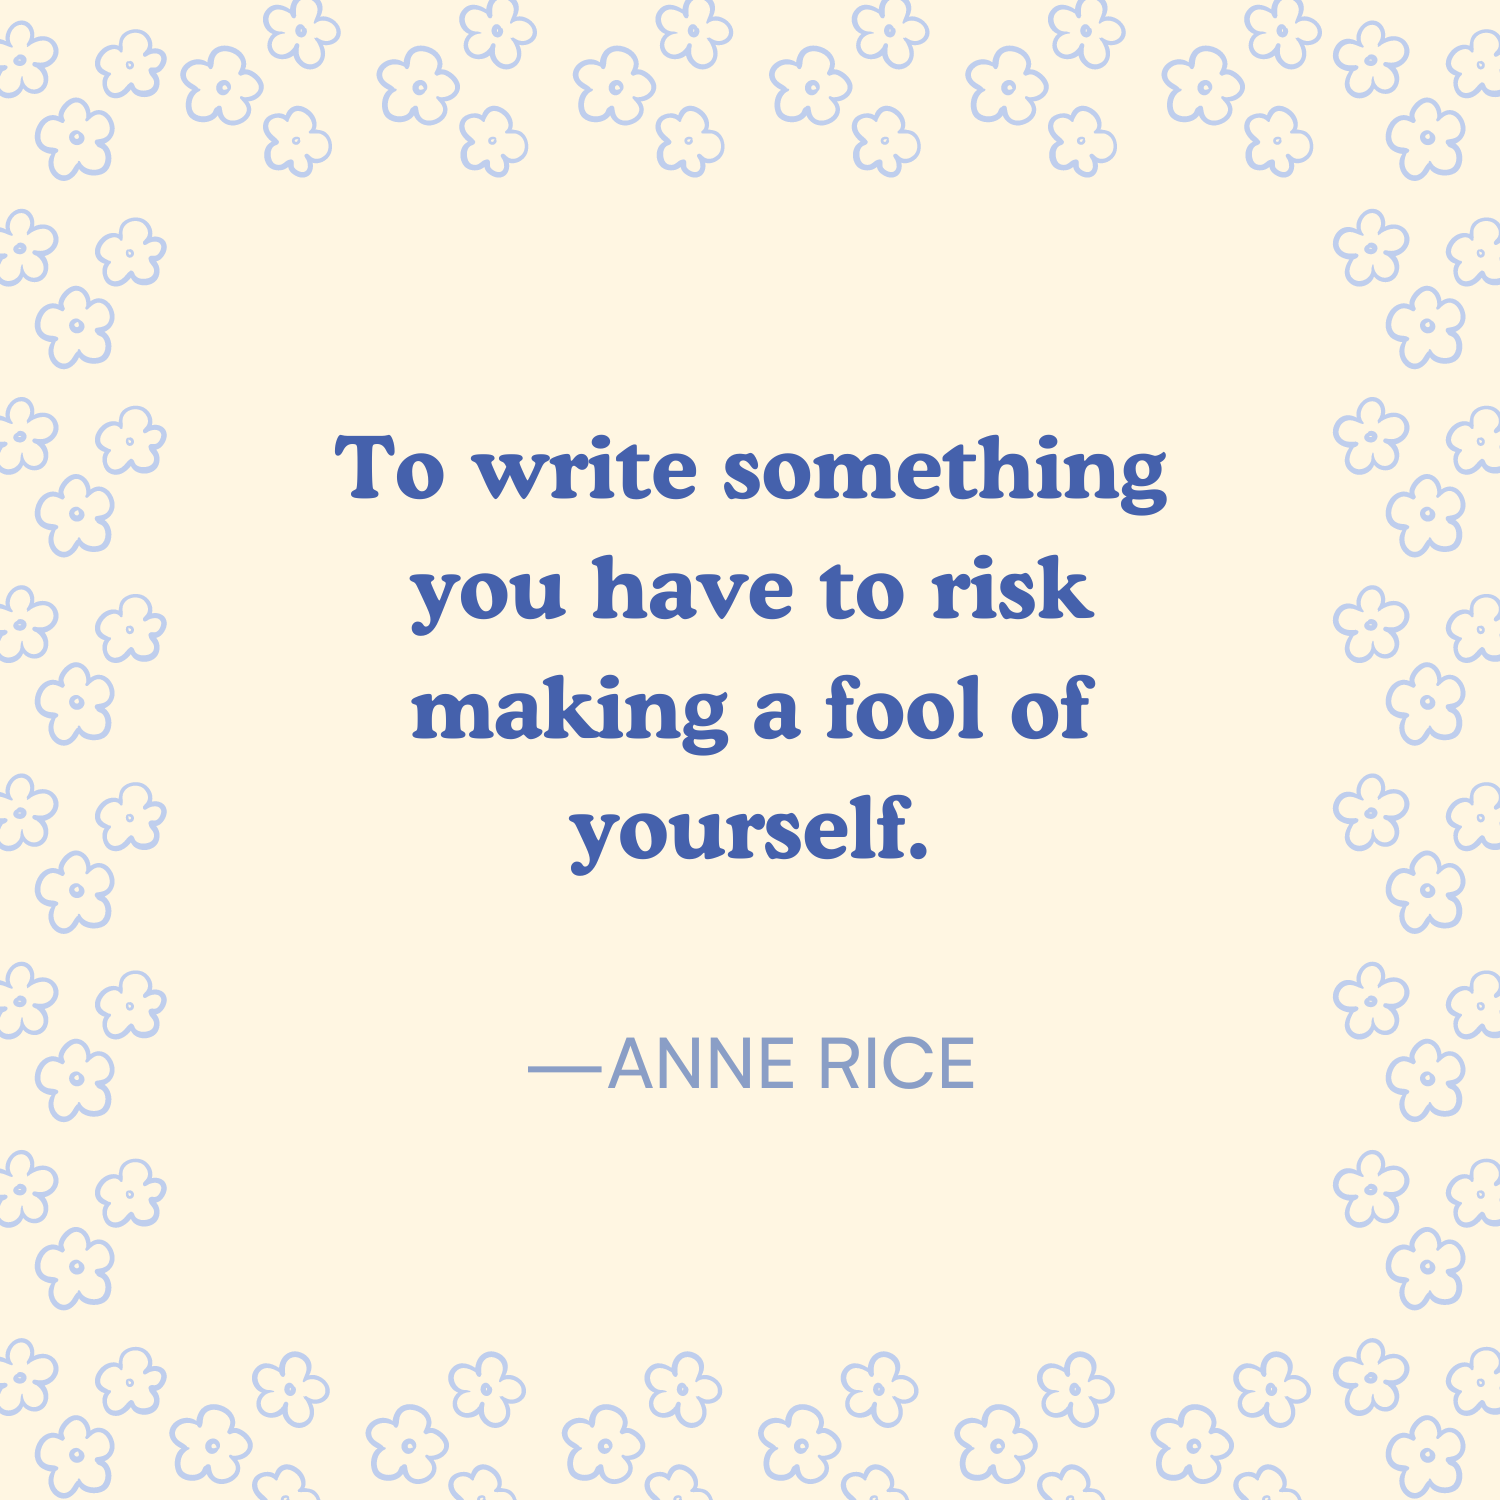 <p>"To write something you have to risk making a fool of yourself." —Anne Rice</p>